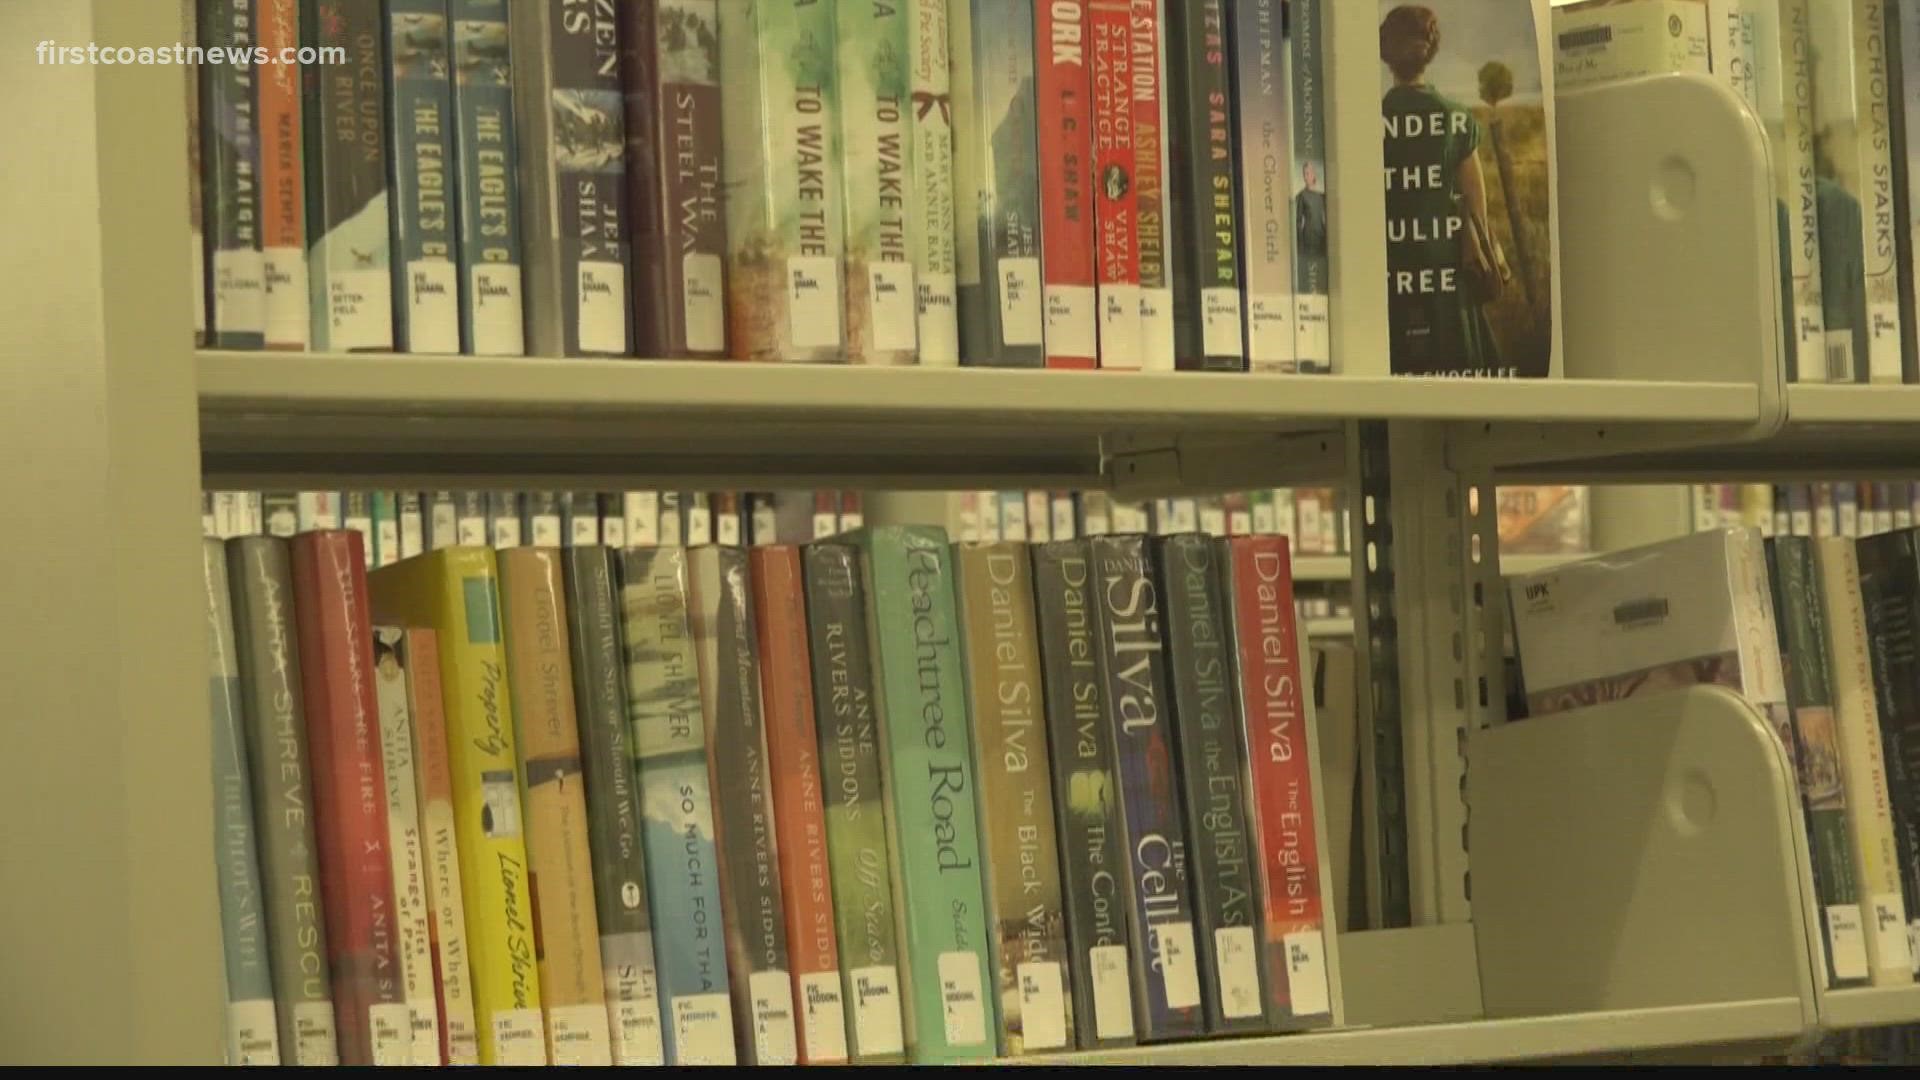 The Friends of the Jacksonville Public Library is a non-profit organization whose purpose is to foster closer relations between the library and the community.